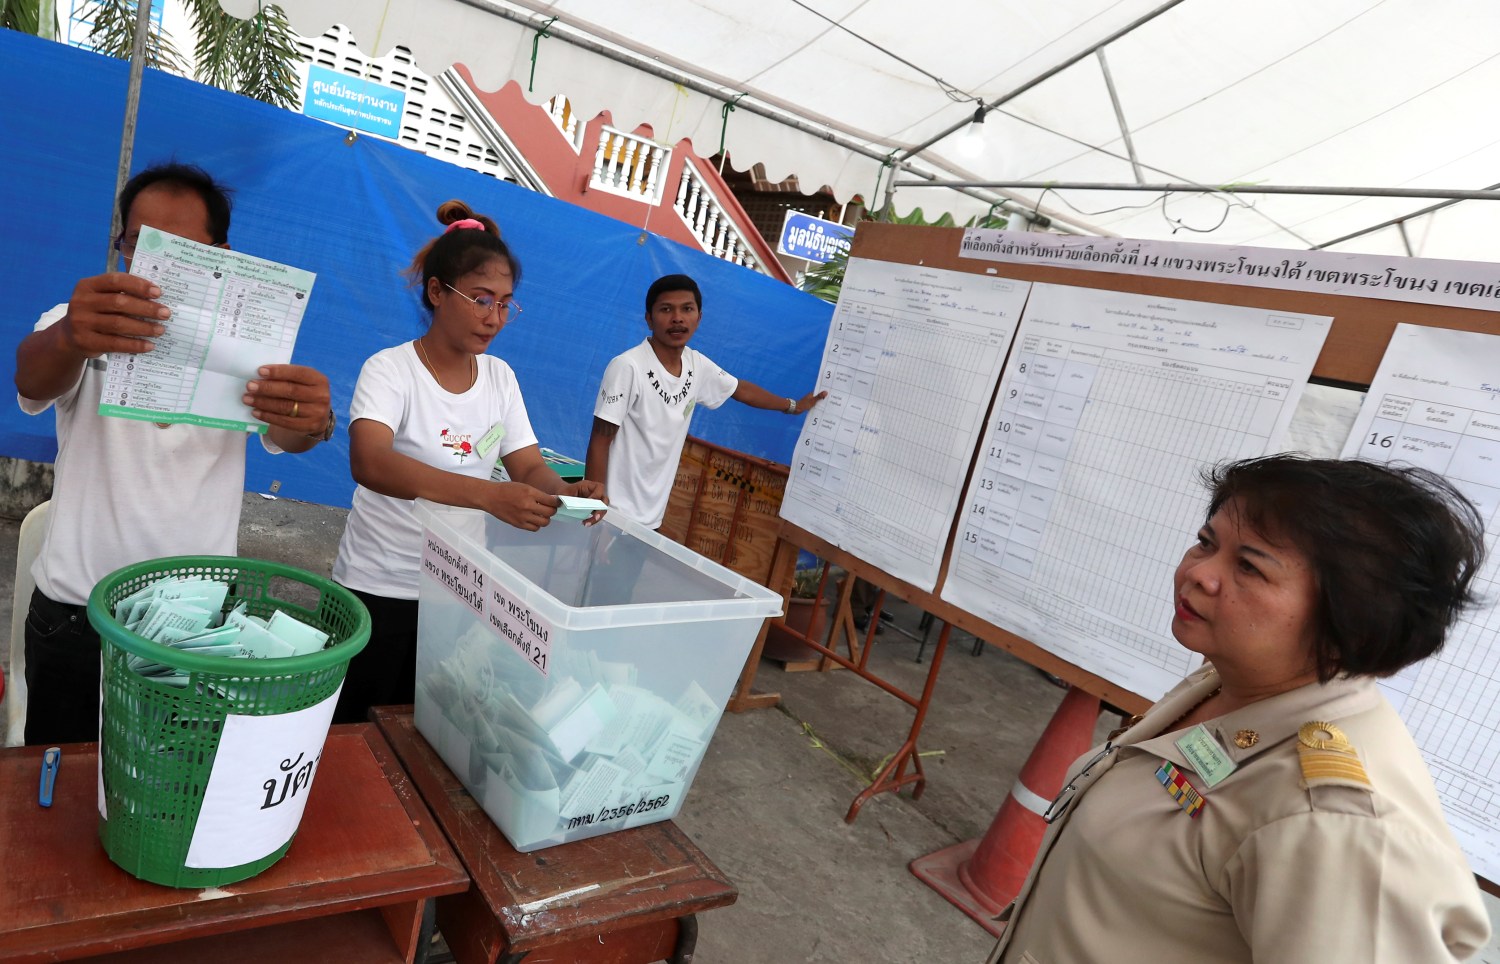 An electoral member shows a ballot during the vote counting, during the general election in Bangkok, Thailand, March 24, 2019. REUTERS/Athit Perawongmetha - RC1C46223DD0